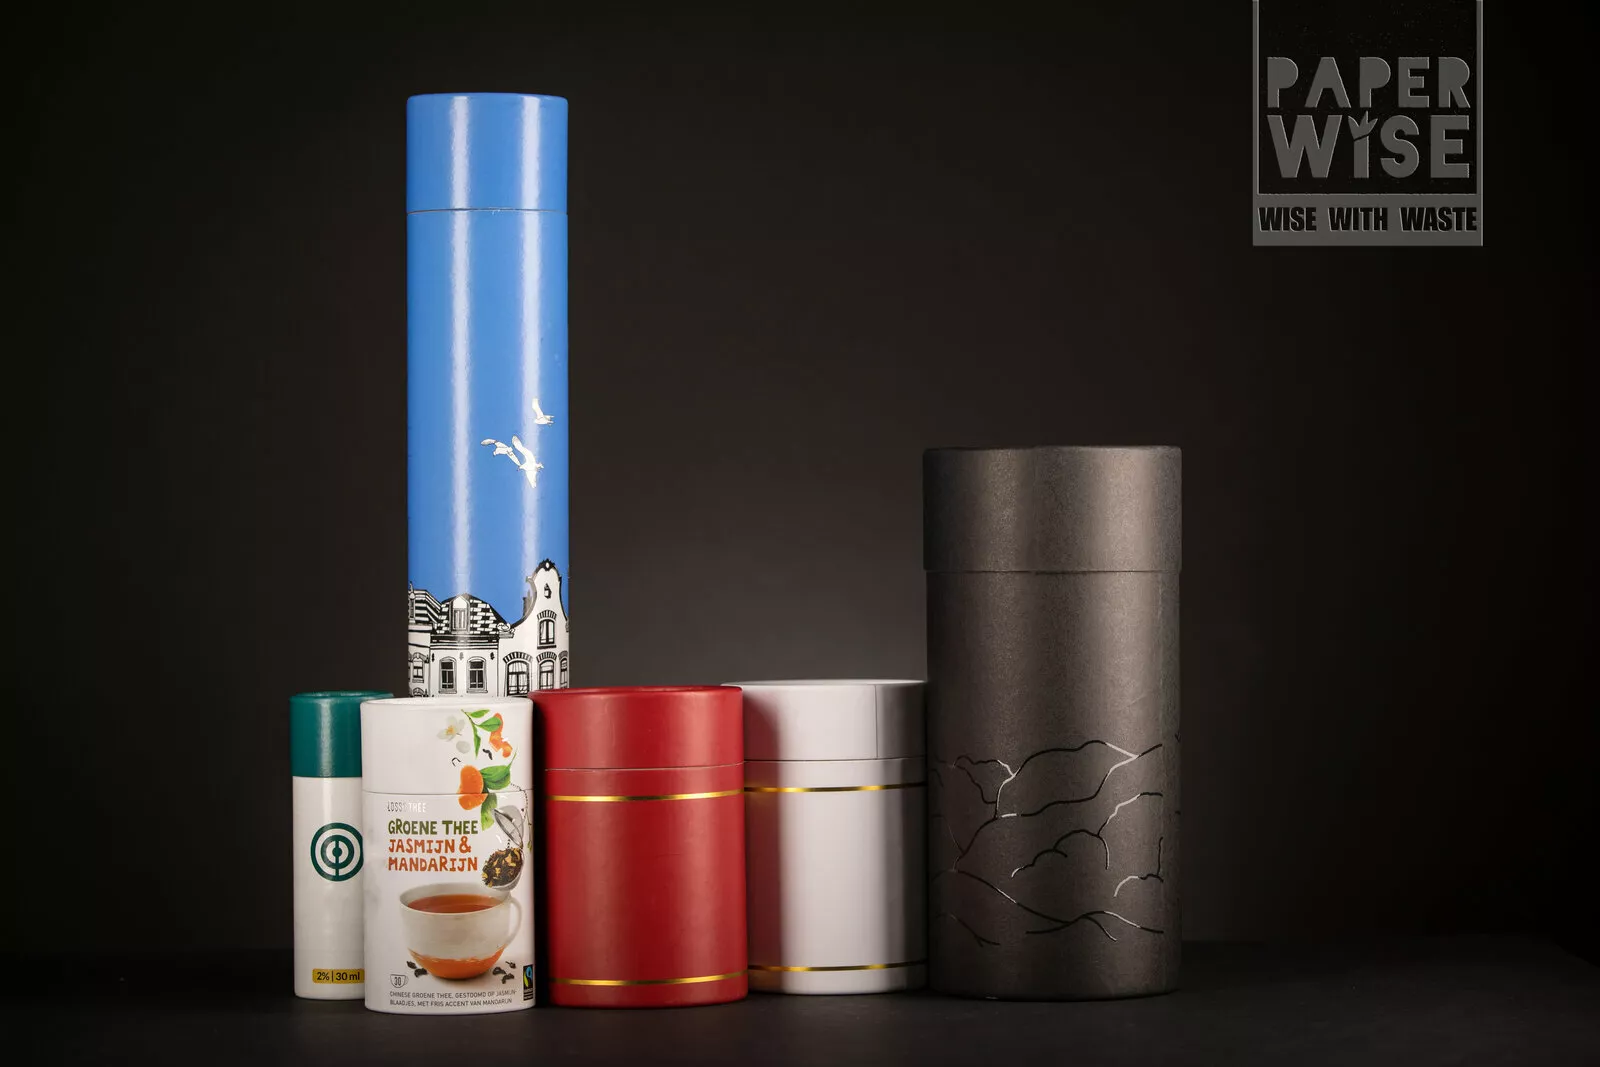 PaperWise sustainable packaging eco paper board tube design round gifts beveage wine giftwapping